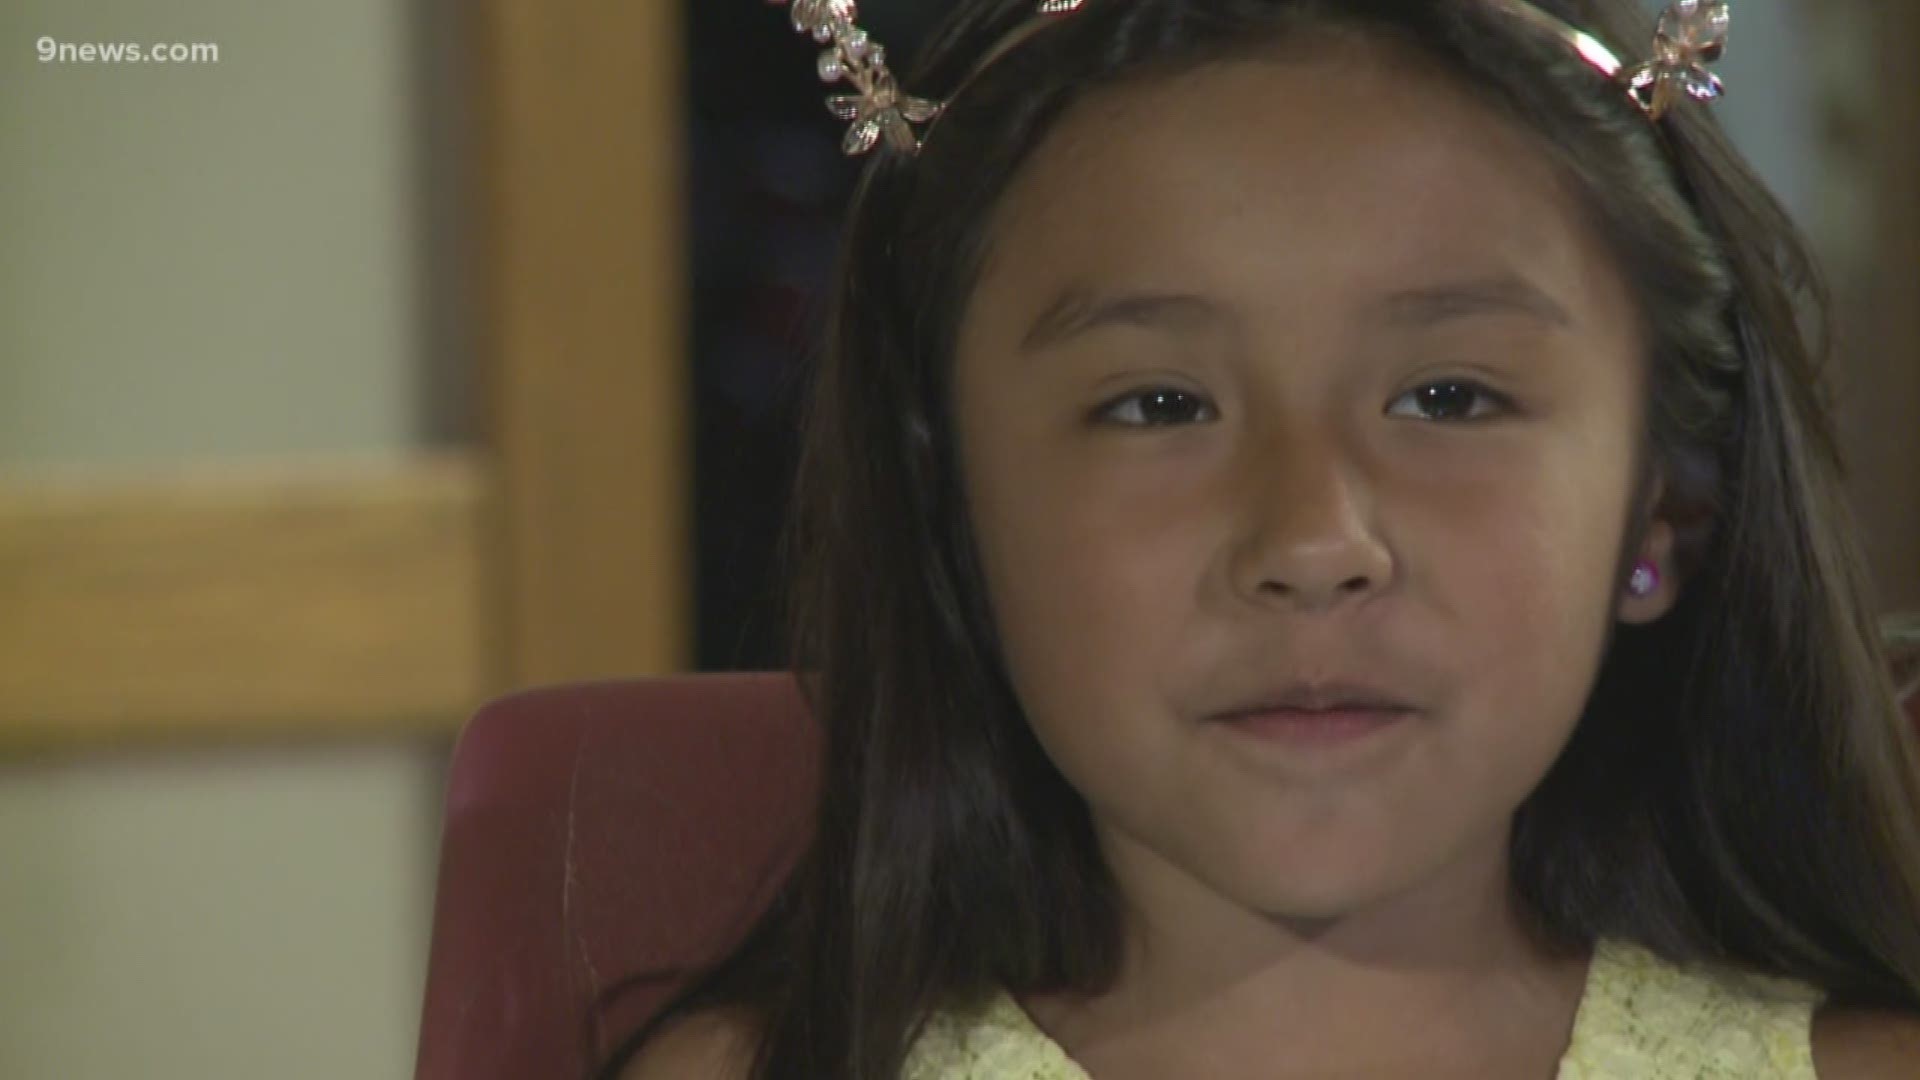 New reports of immigration raids this weekend once again have people living in the US illegally concerned. They also have frightened an 8-year-old American citizen living with her mom in a Denver church that offered sanctuary to her mom.